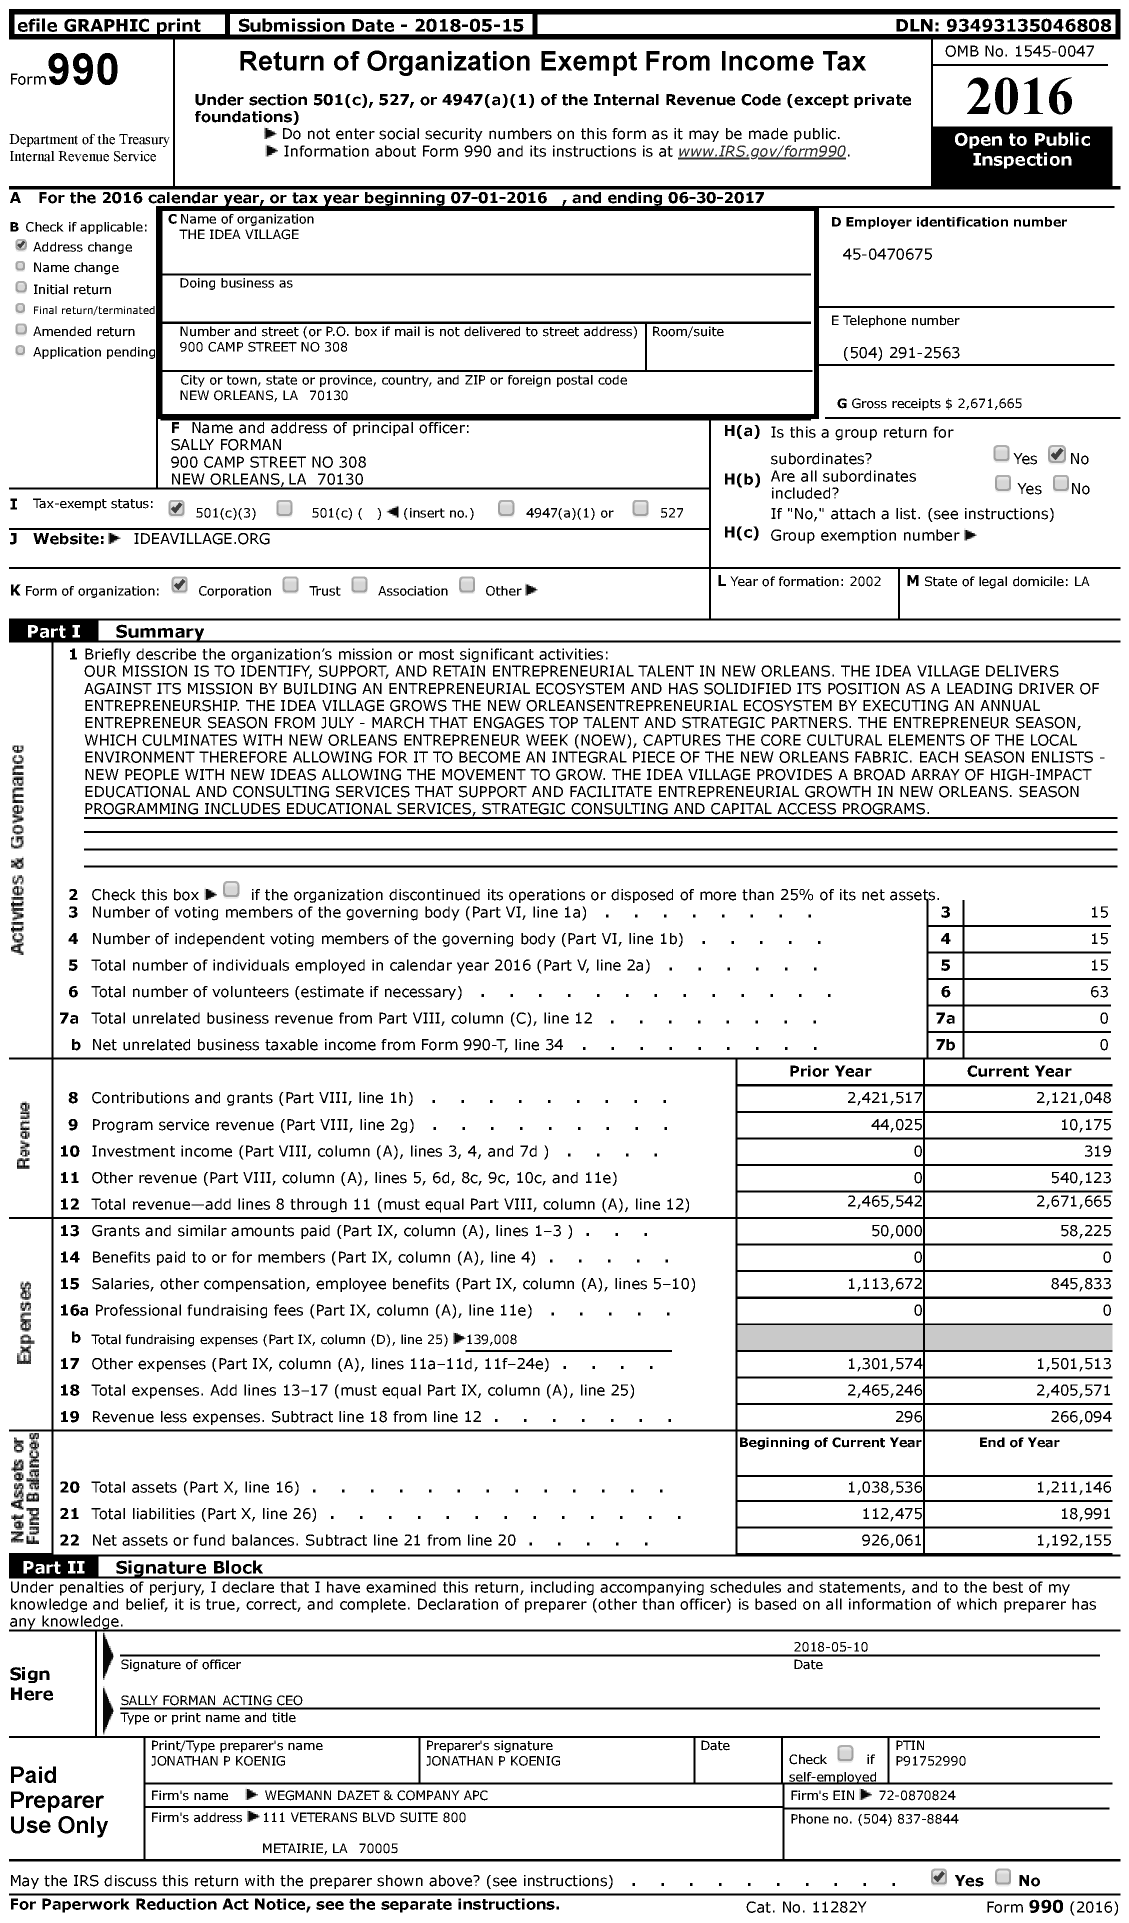 Image of first page of 2016 Form 990 for The Idea Village